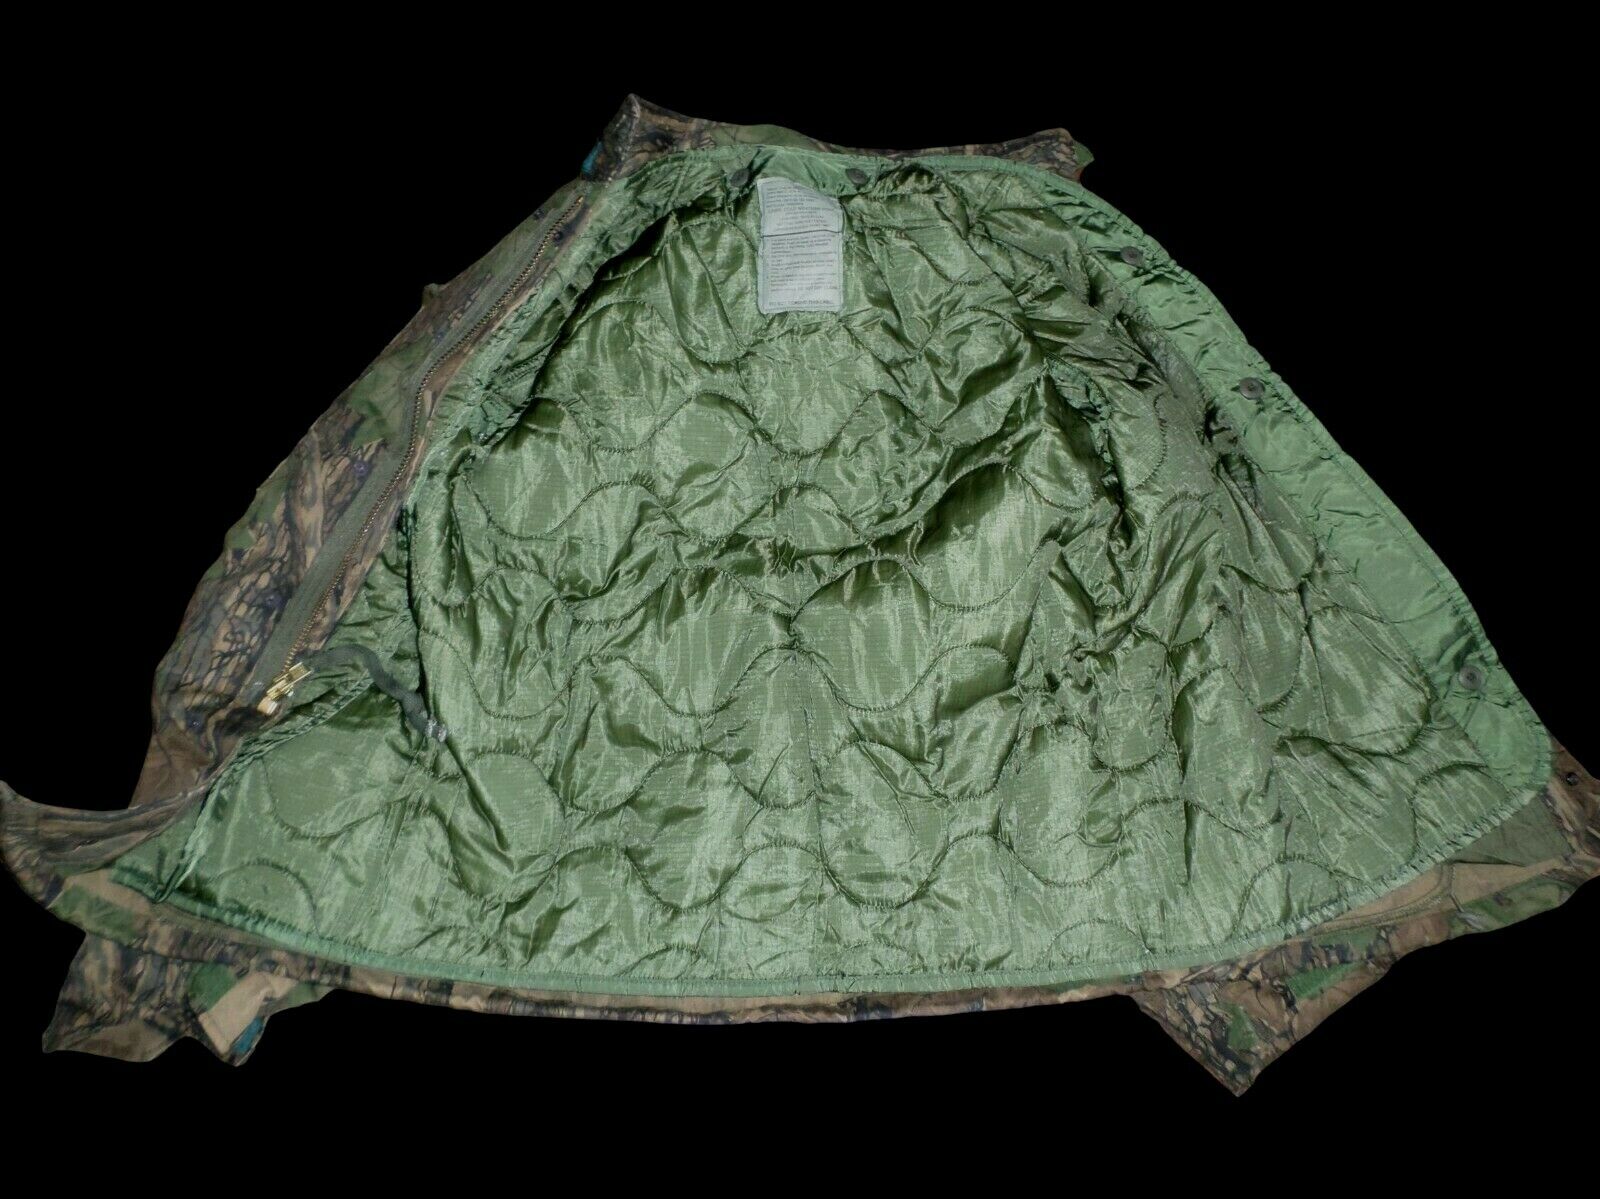 NEW MILITARY ISSUE M-65 FIELD JACKET LINER QUILTED COAT LINER MEDIUM USA  MADE